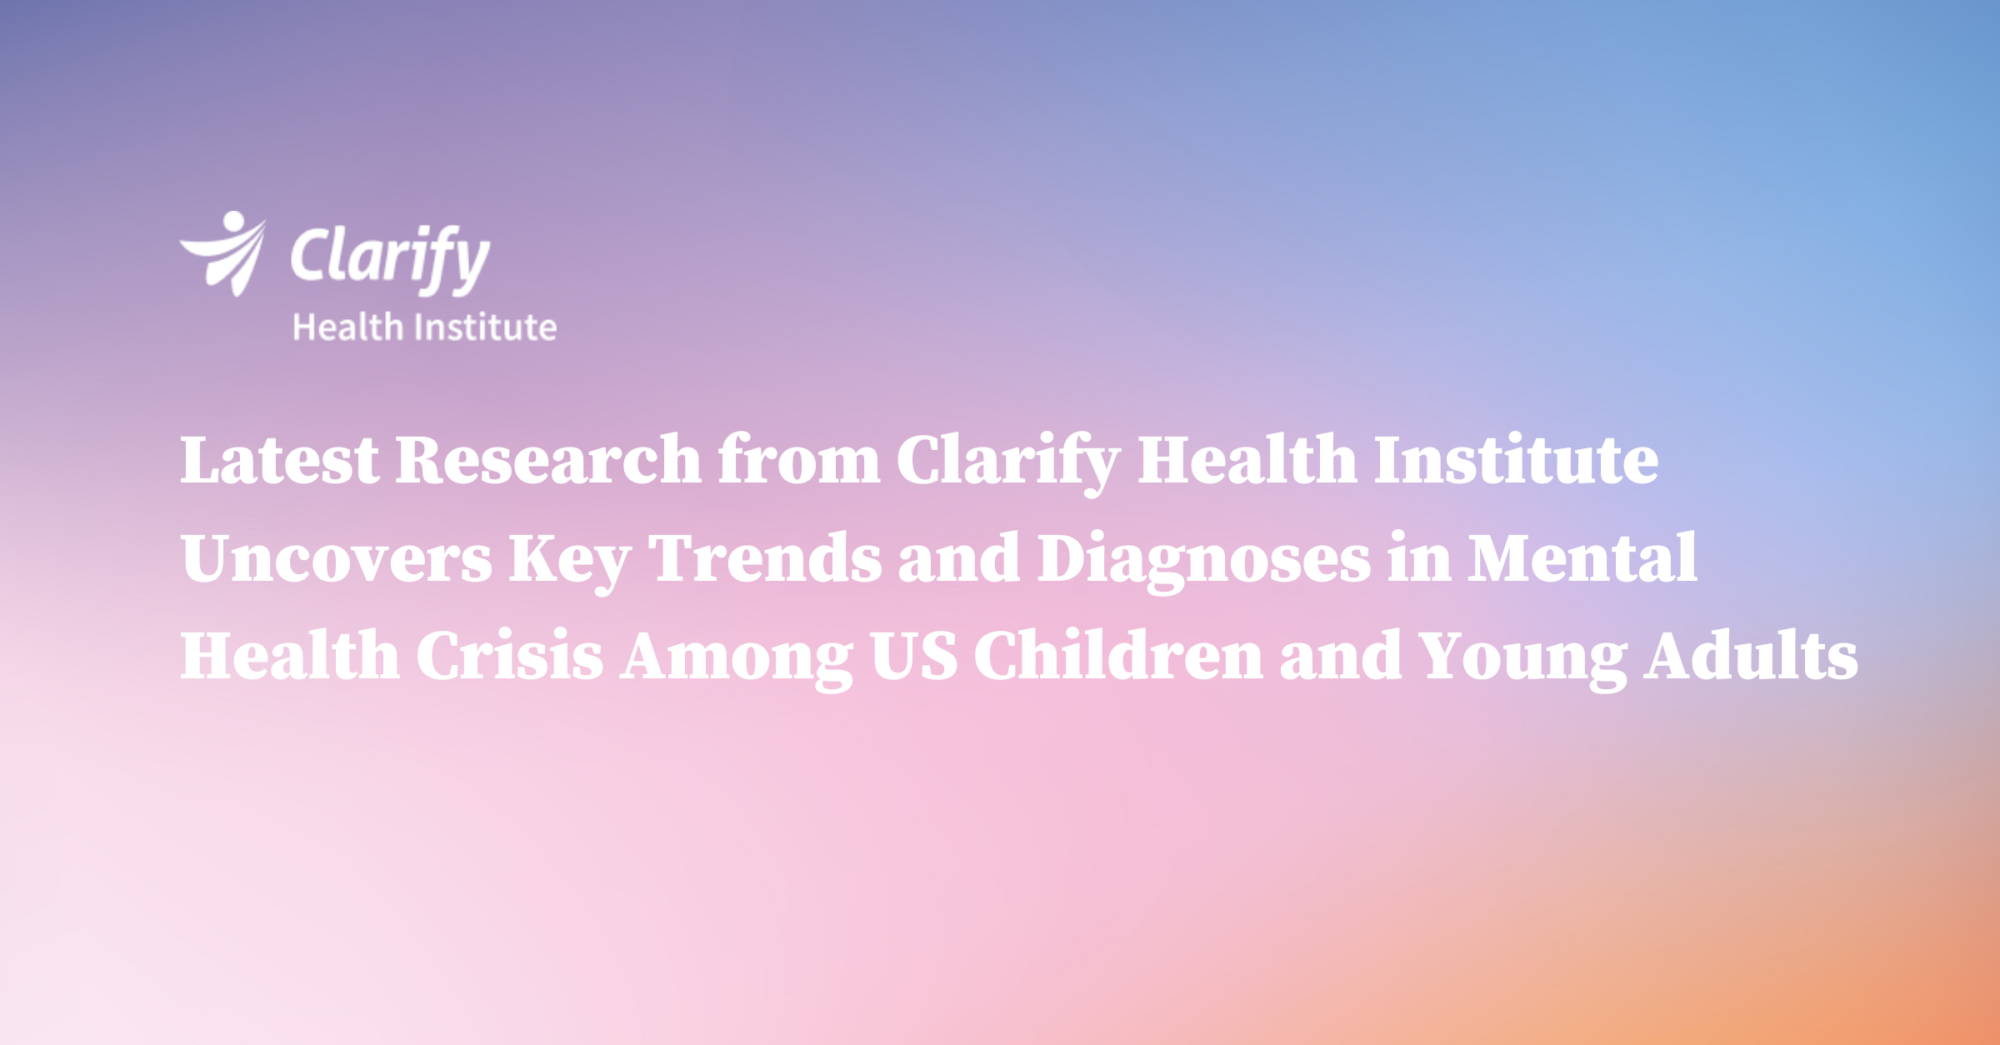 Thumbnail for Latest Research from Clarify Health Institute Uncovers Key Trends and Diagnoses in Mental Health Crisis Among US Children and Young Adults